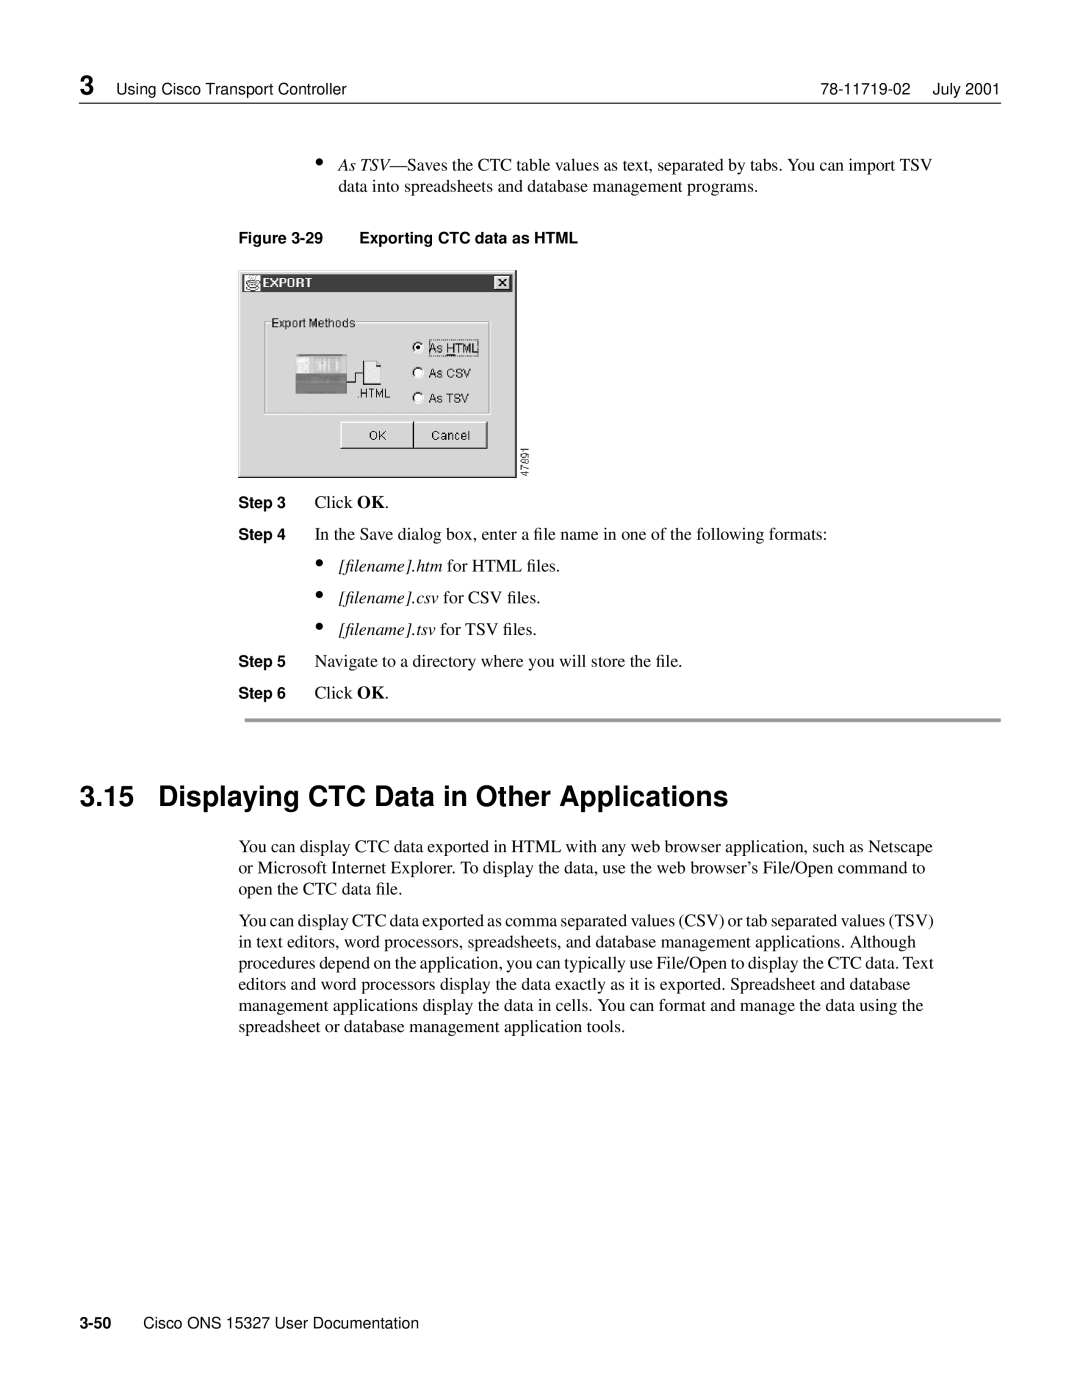 Cisco Systems ONS 15327 manual Displaying CTC Data in Other Applications, ﬁlename.htm, ﬁlename.csv, ﬁlename.tsv 